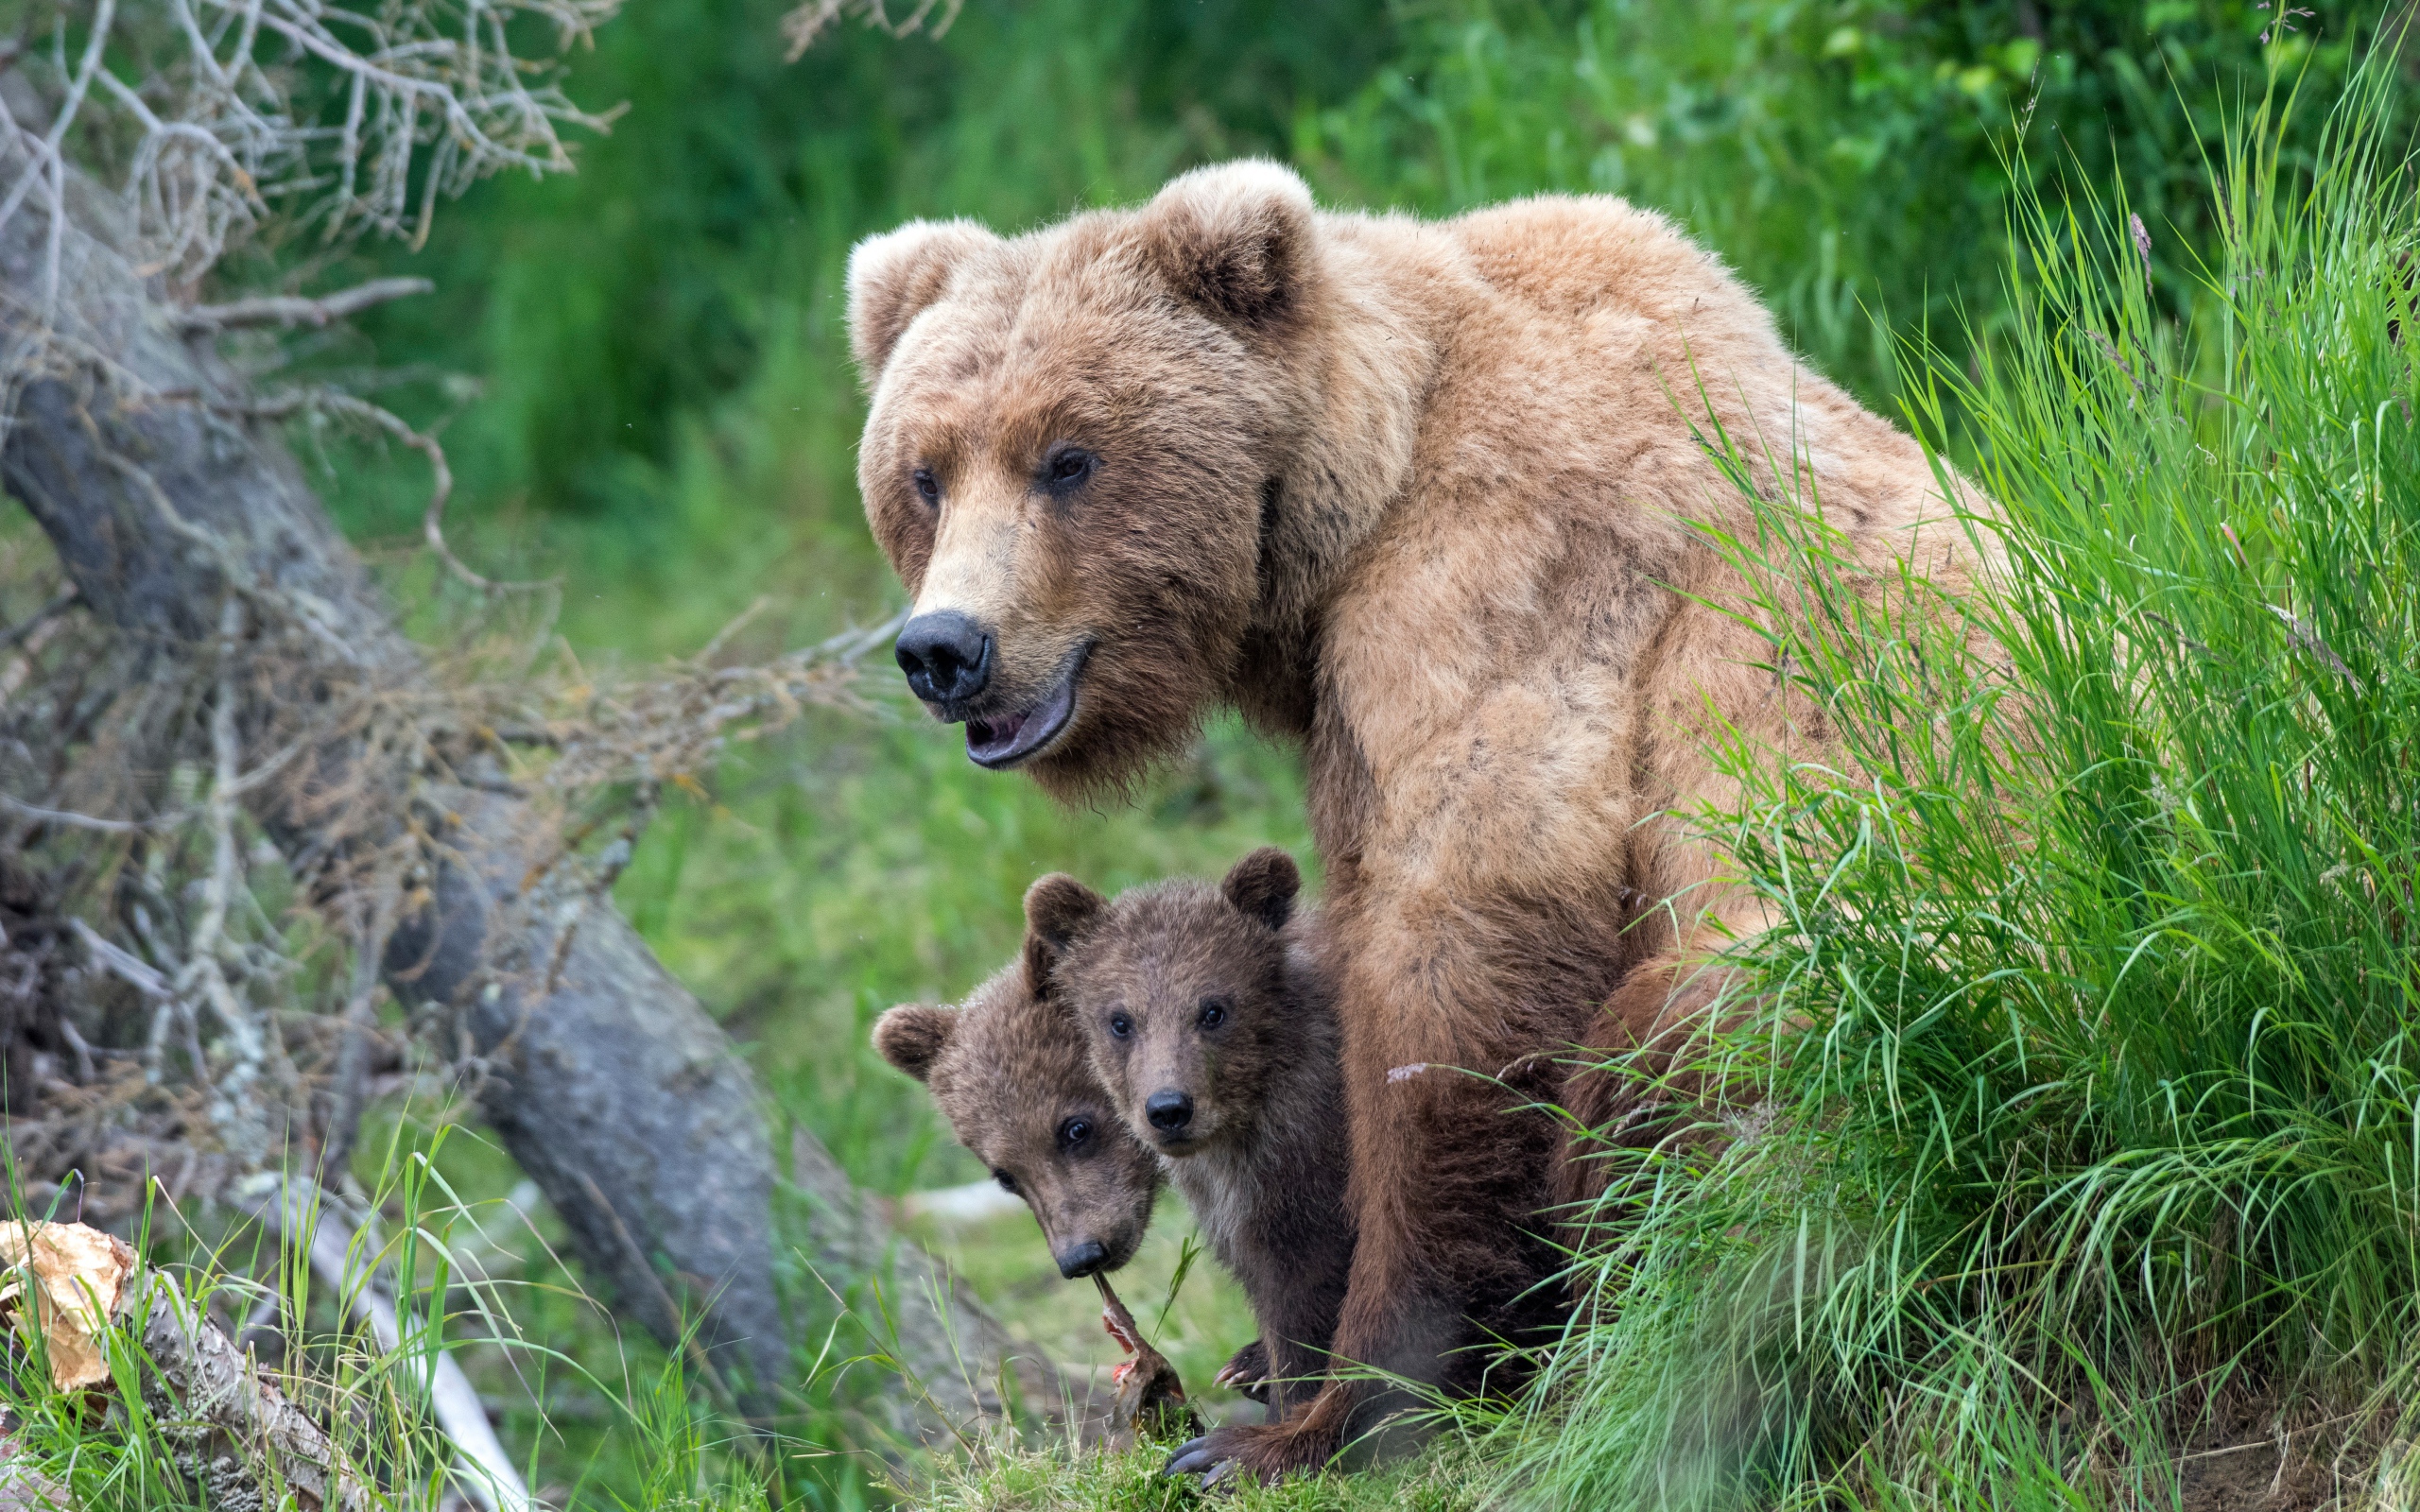 Brown bear with little cubs in the grass